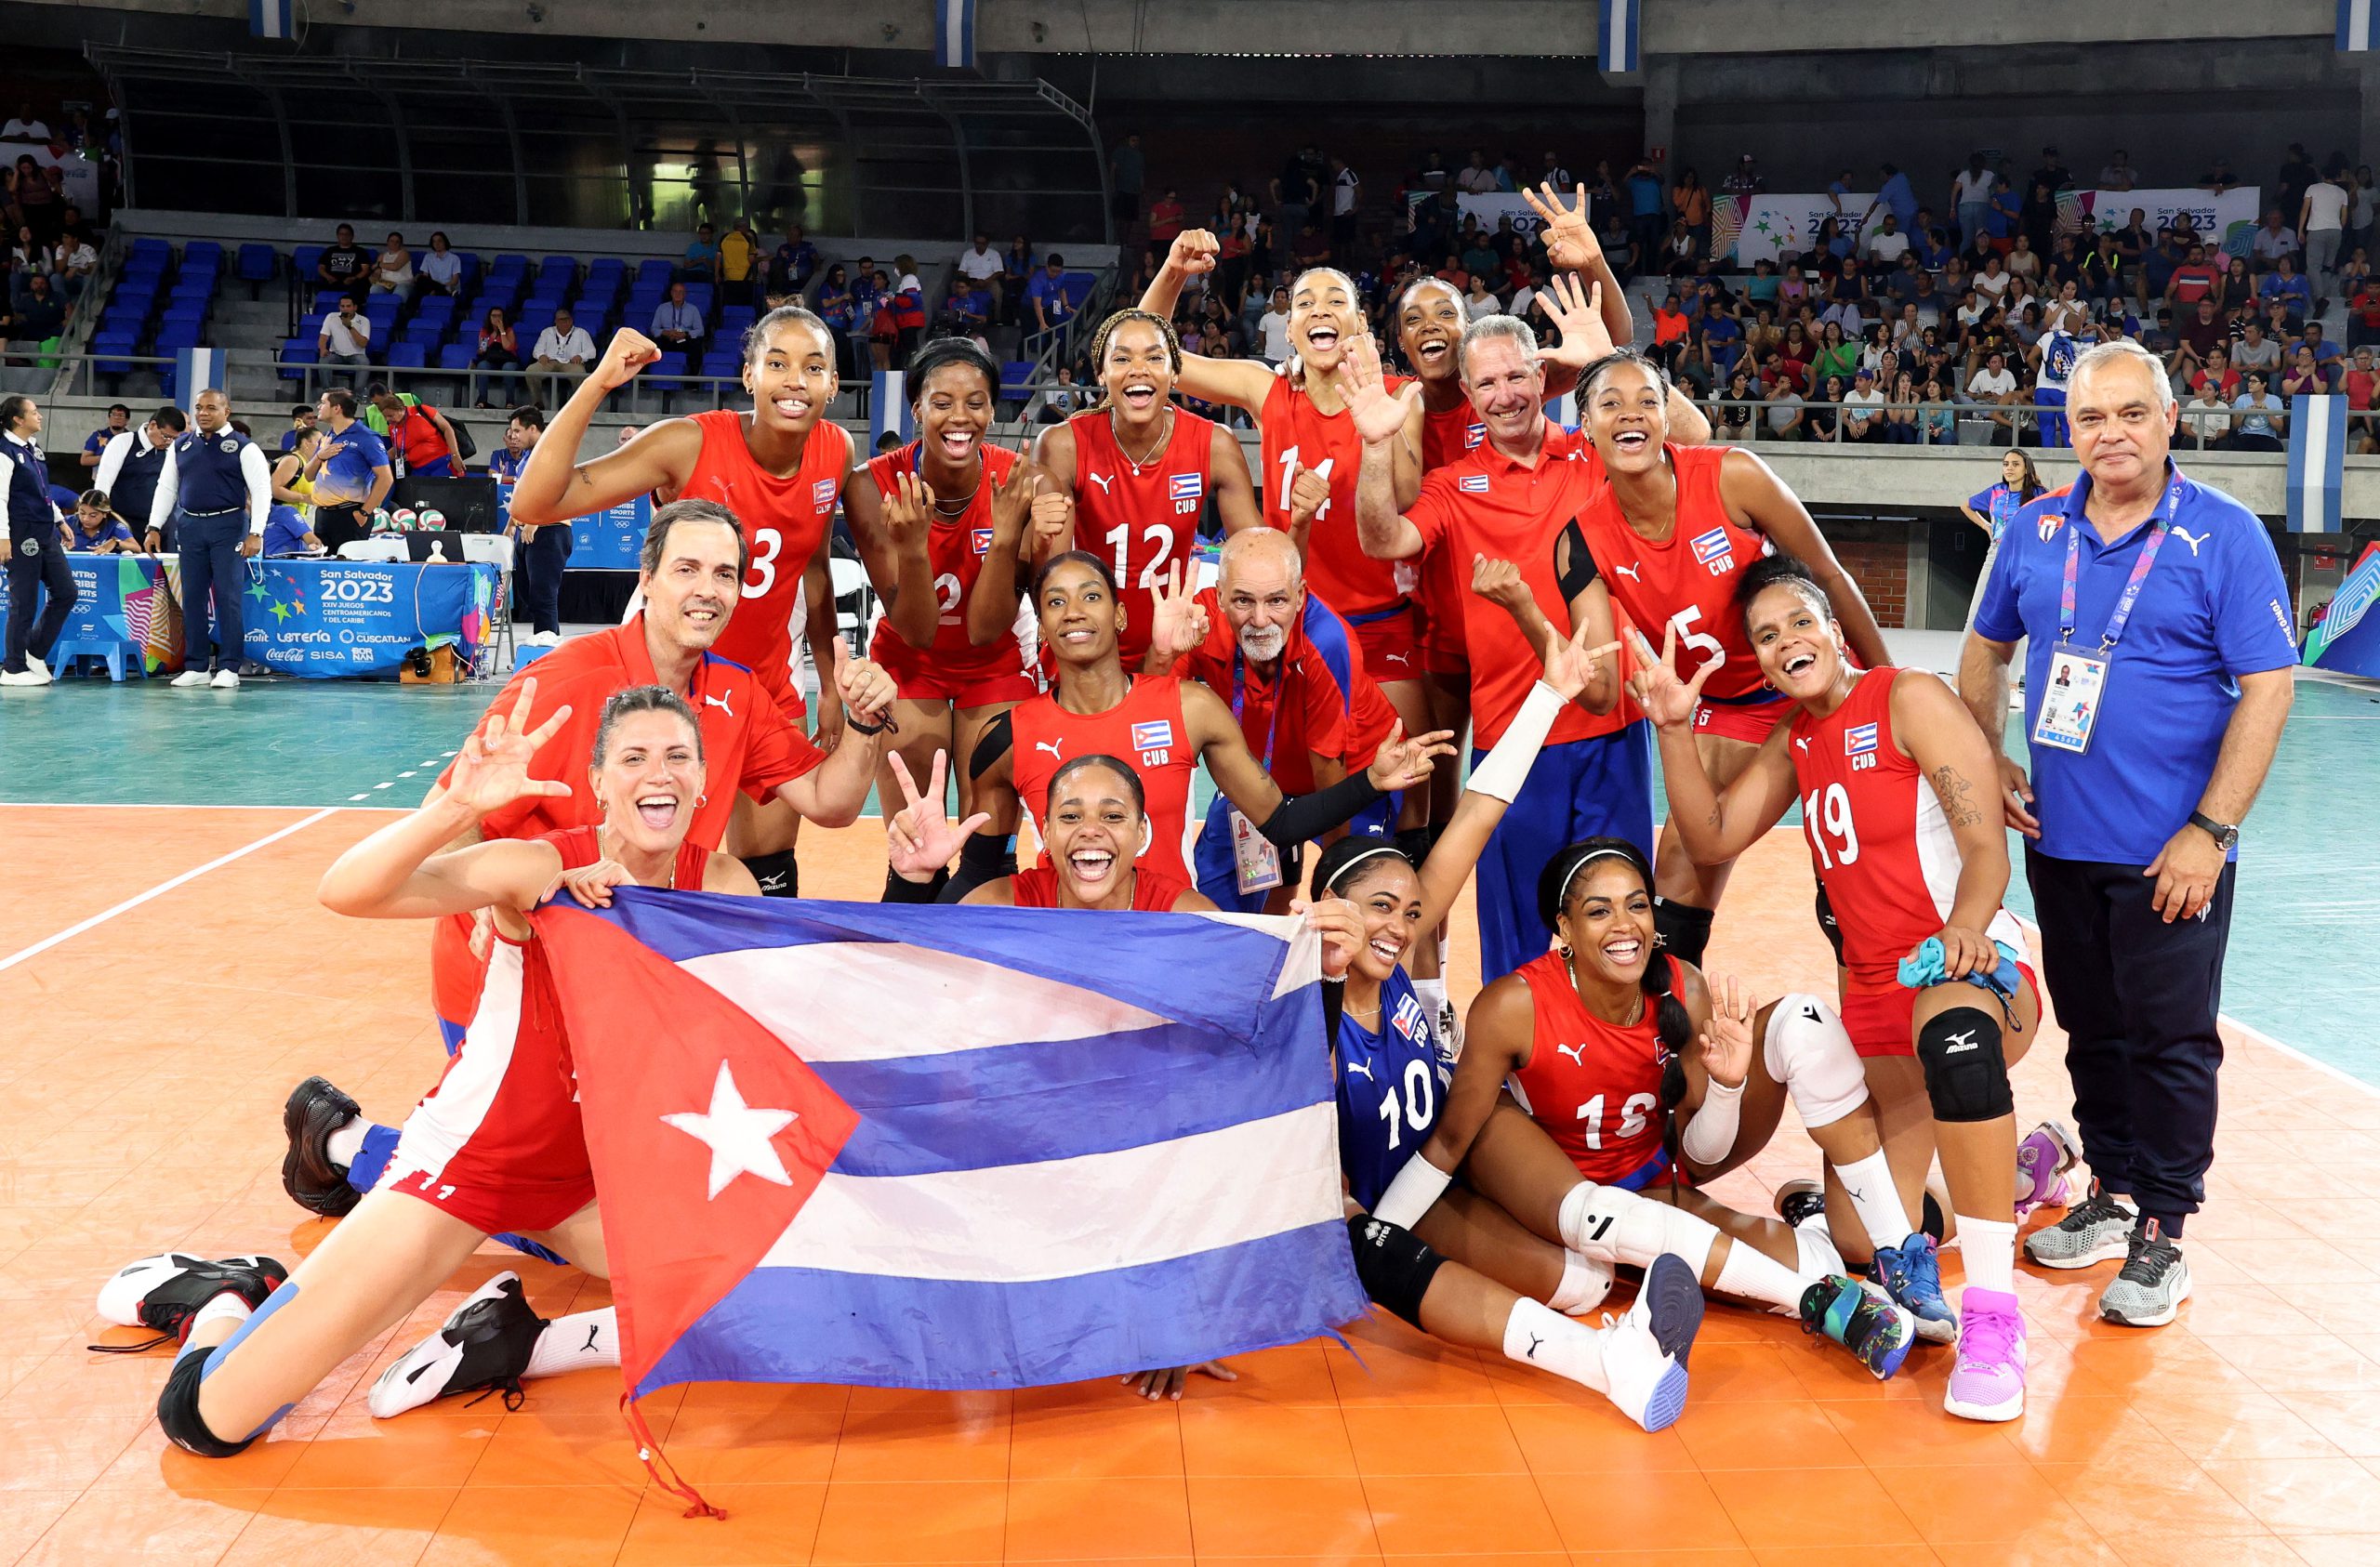 Cuba beats Colombia to win the CAC Games Bronze Medal